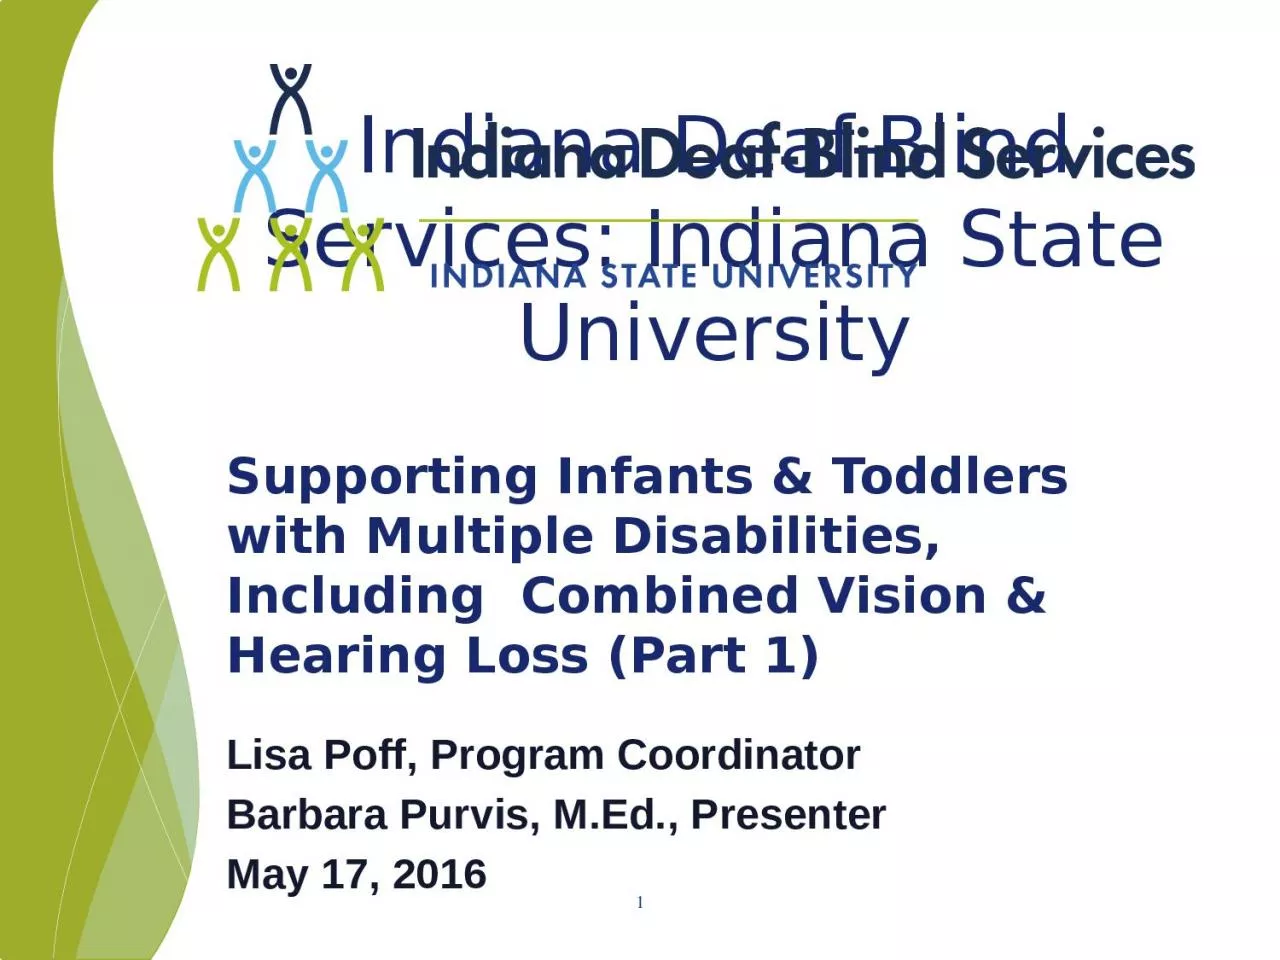 Indiana Deaf-Blind Services: Indiana State University